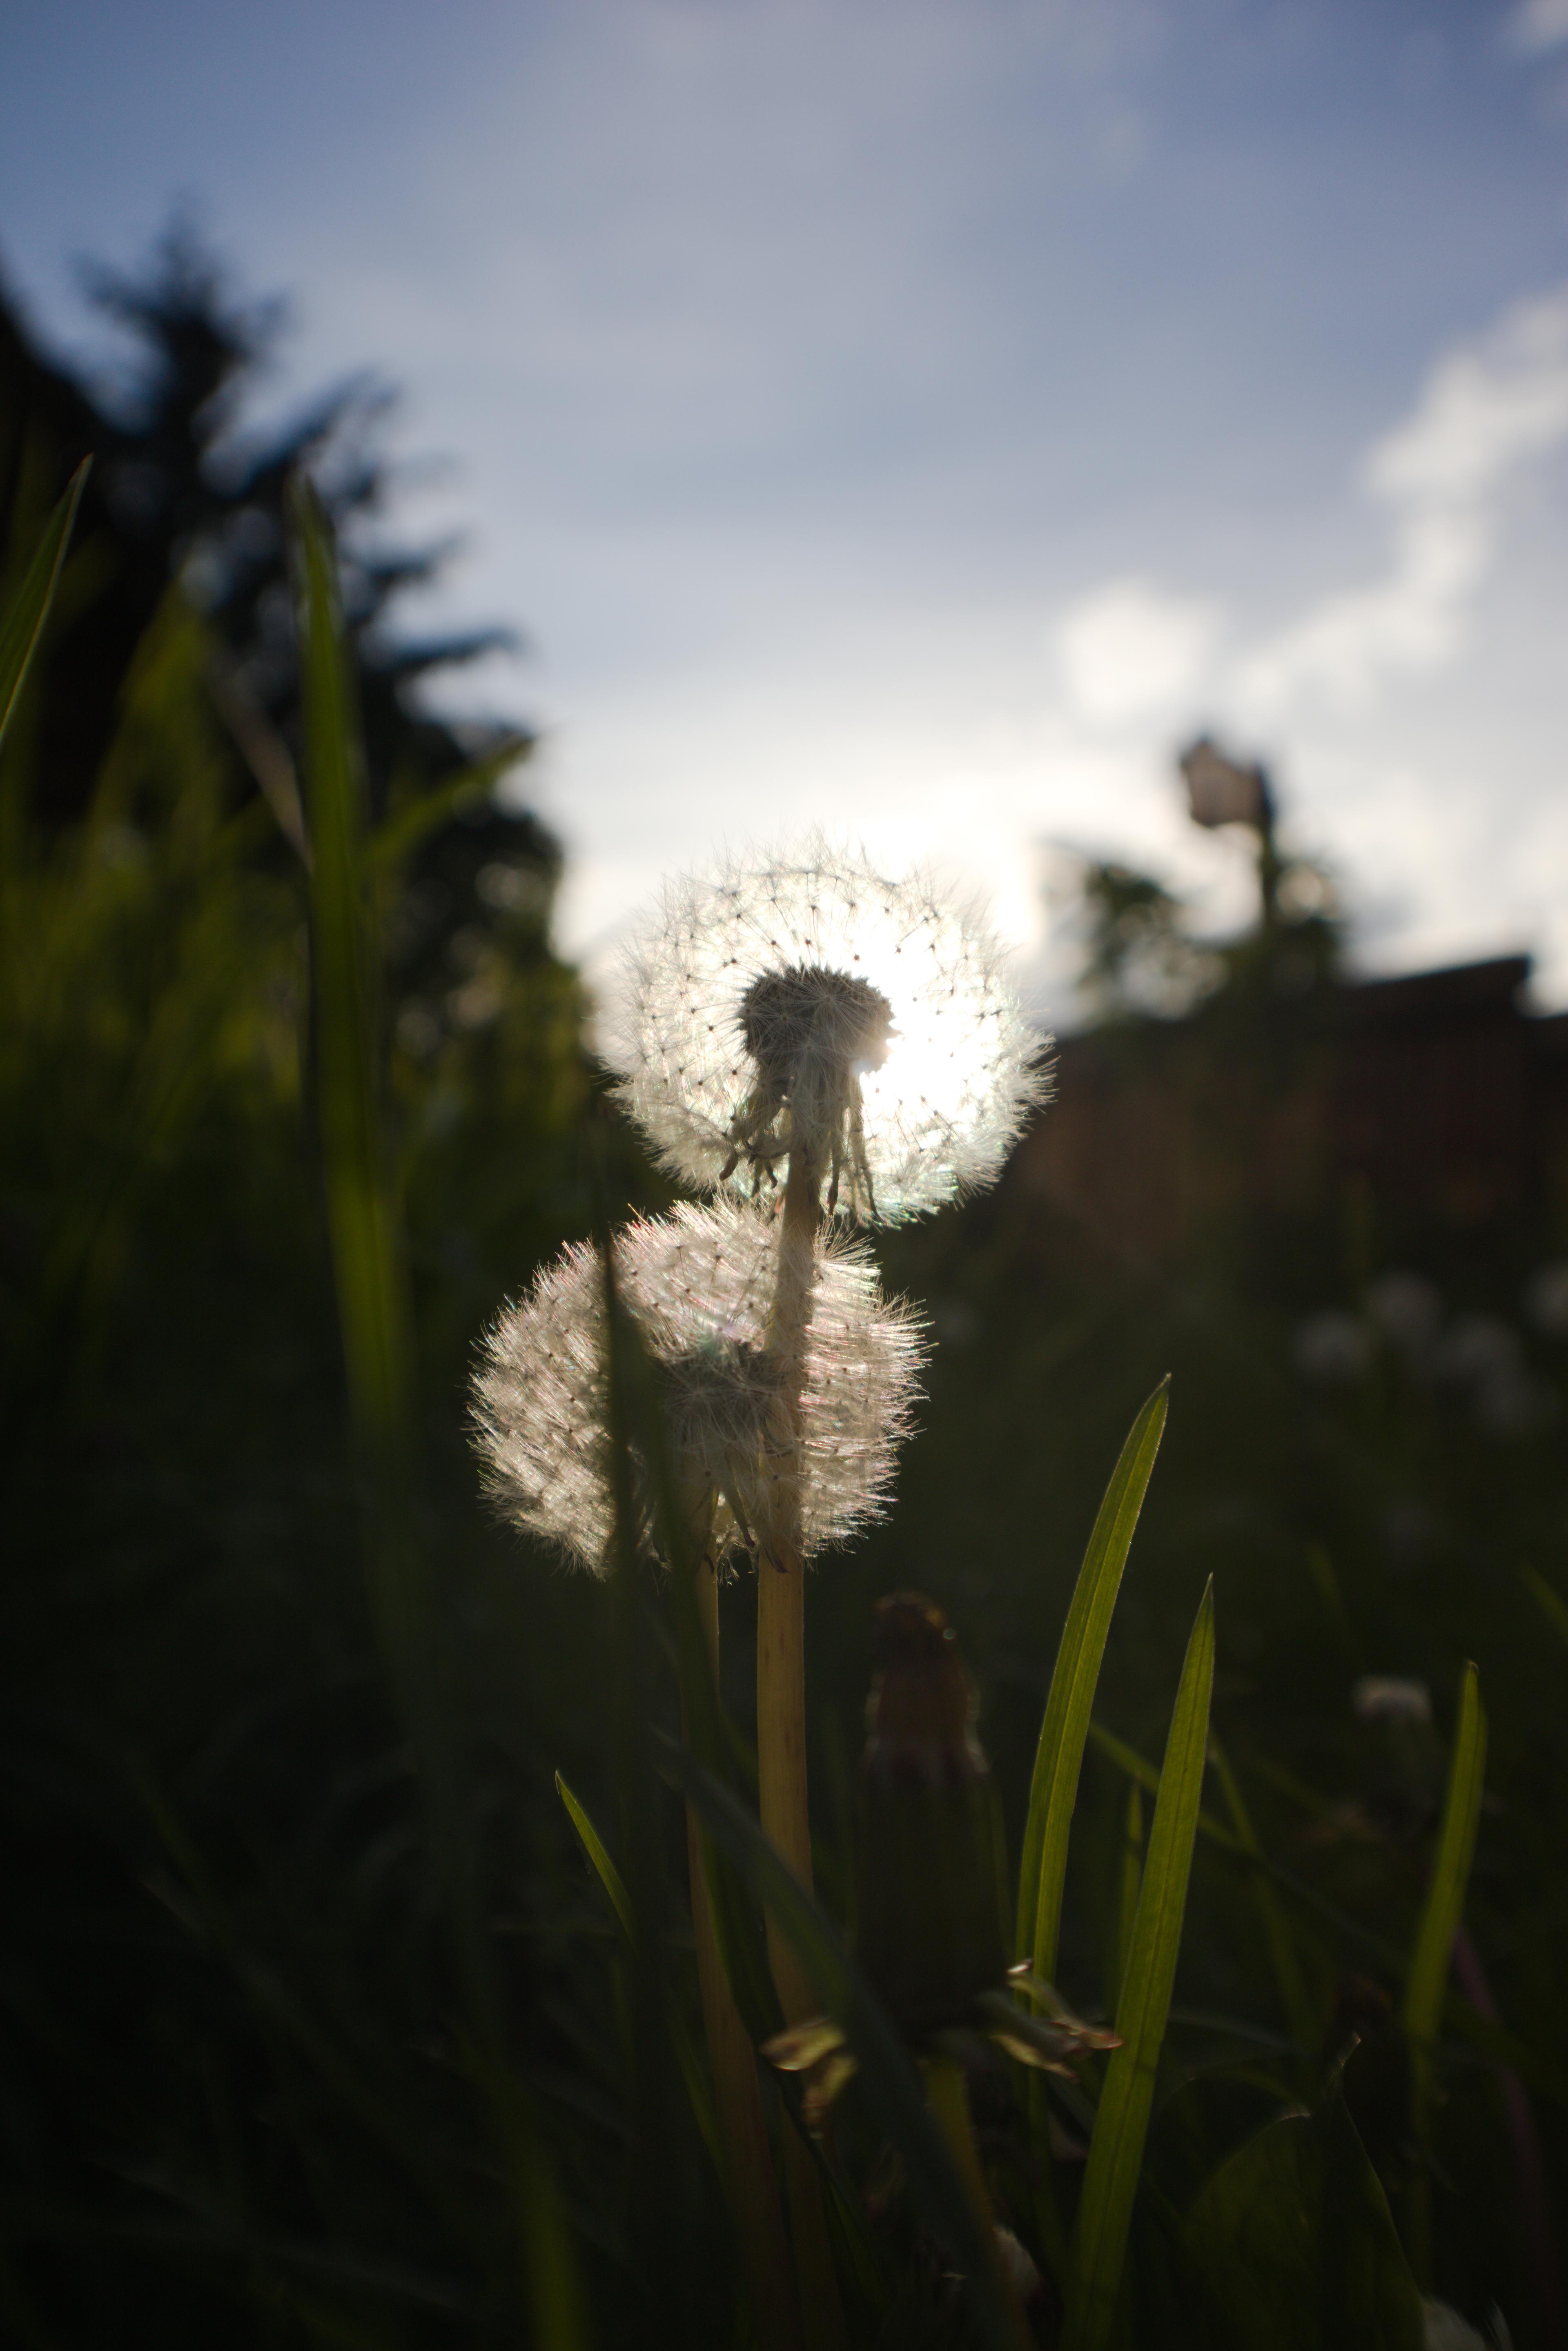 Dandelions in the sunset.